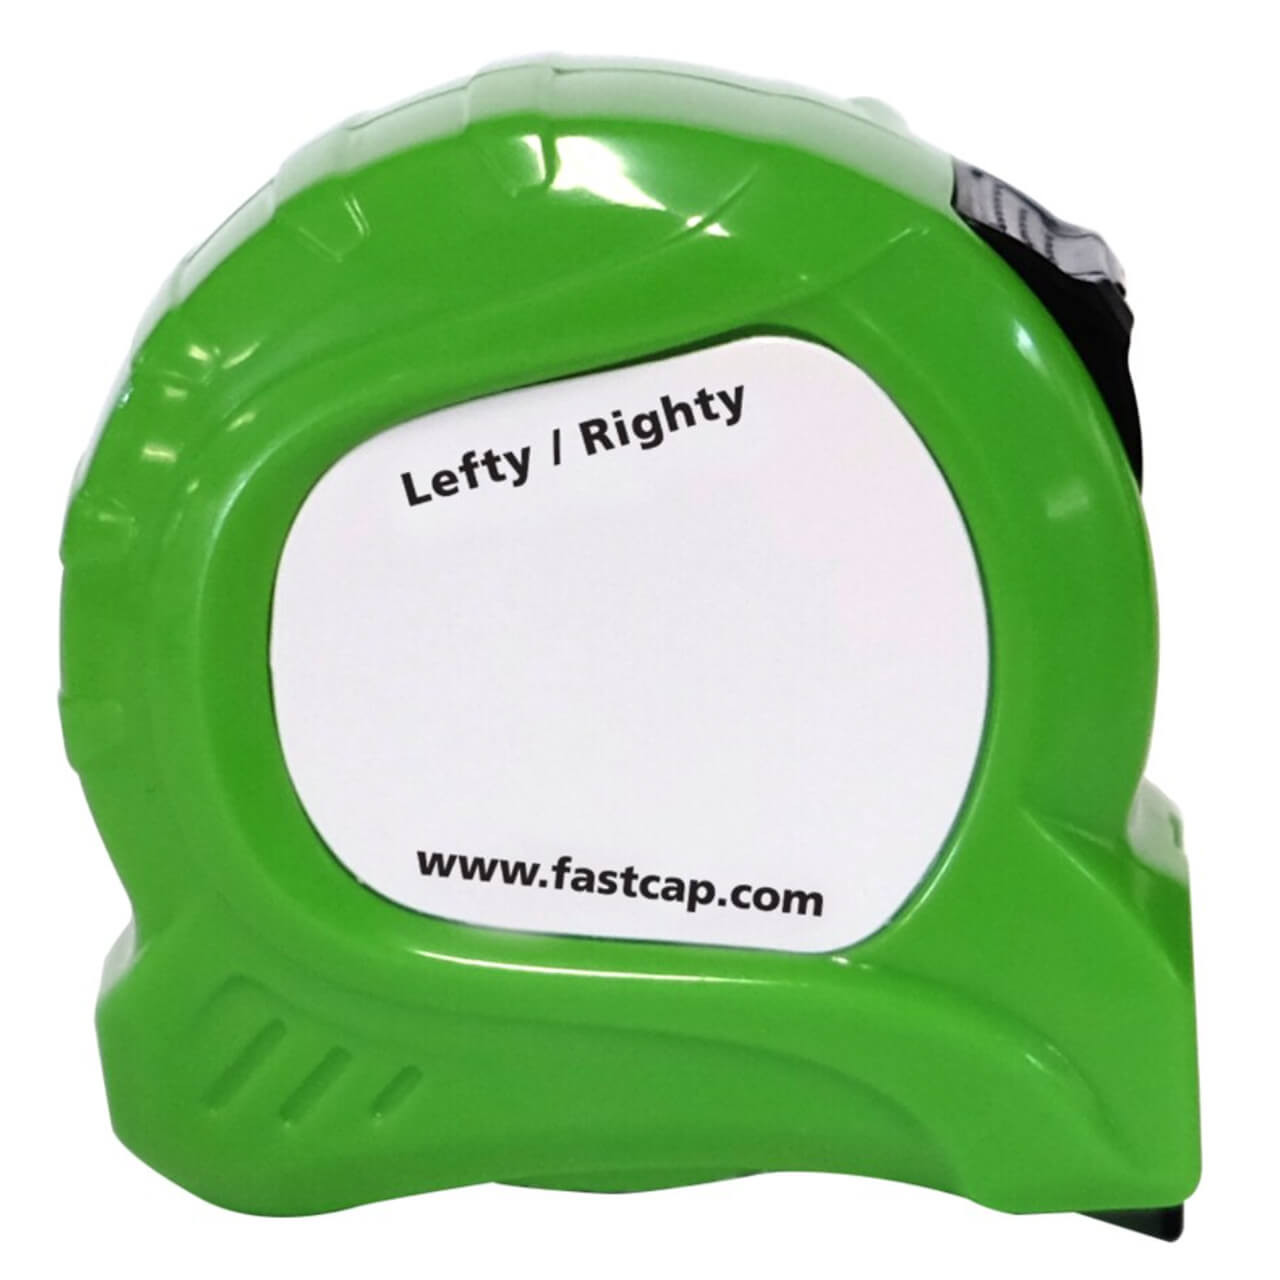 Fastcap 16 Ft. Lefty/Righty Tape PSSR16 from Fastcap - Acme Tools